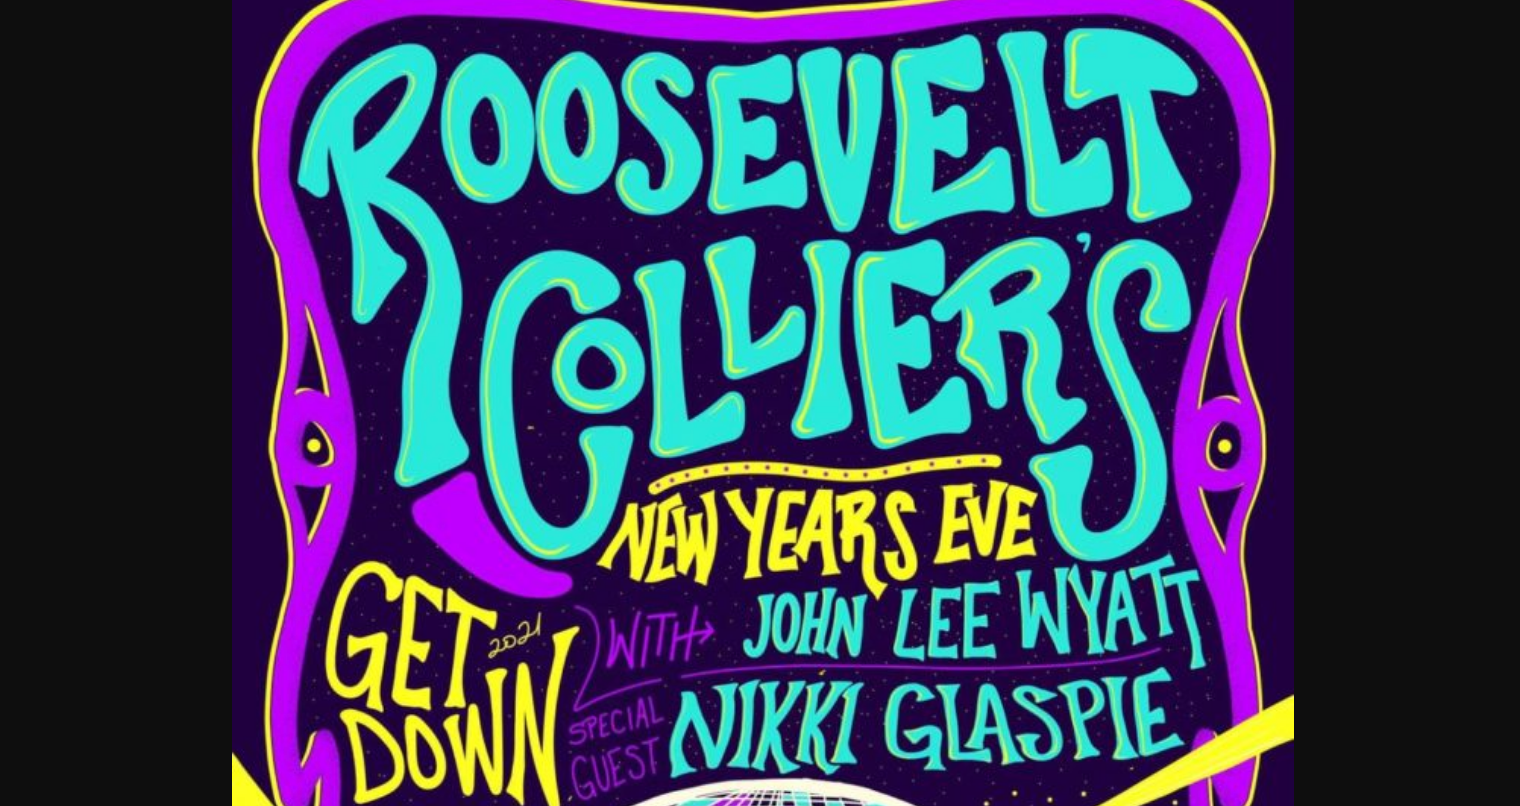 Roosevelt Collier Sets New Year's Eve Show in Florida Feat. Nikki Glaspie